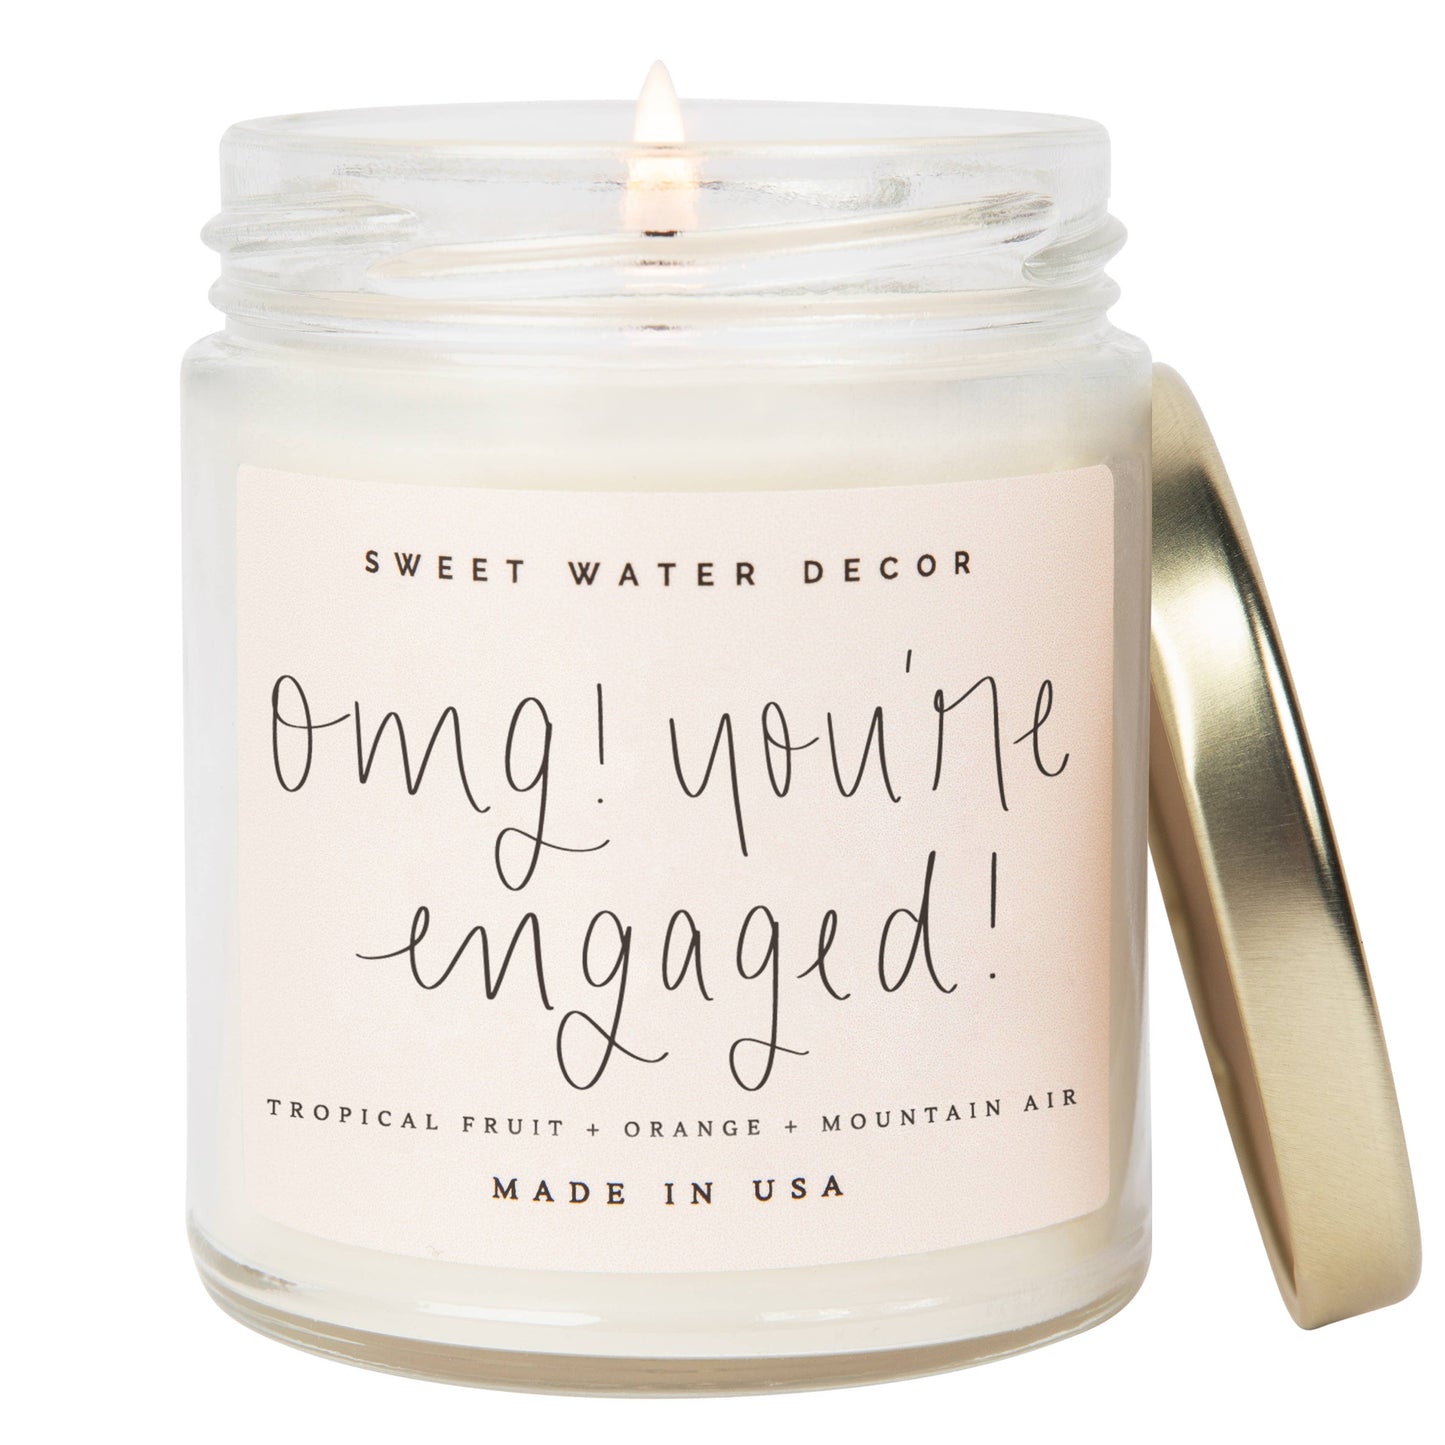 OMG! You're Engaged! Soy Candle